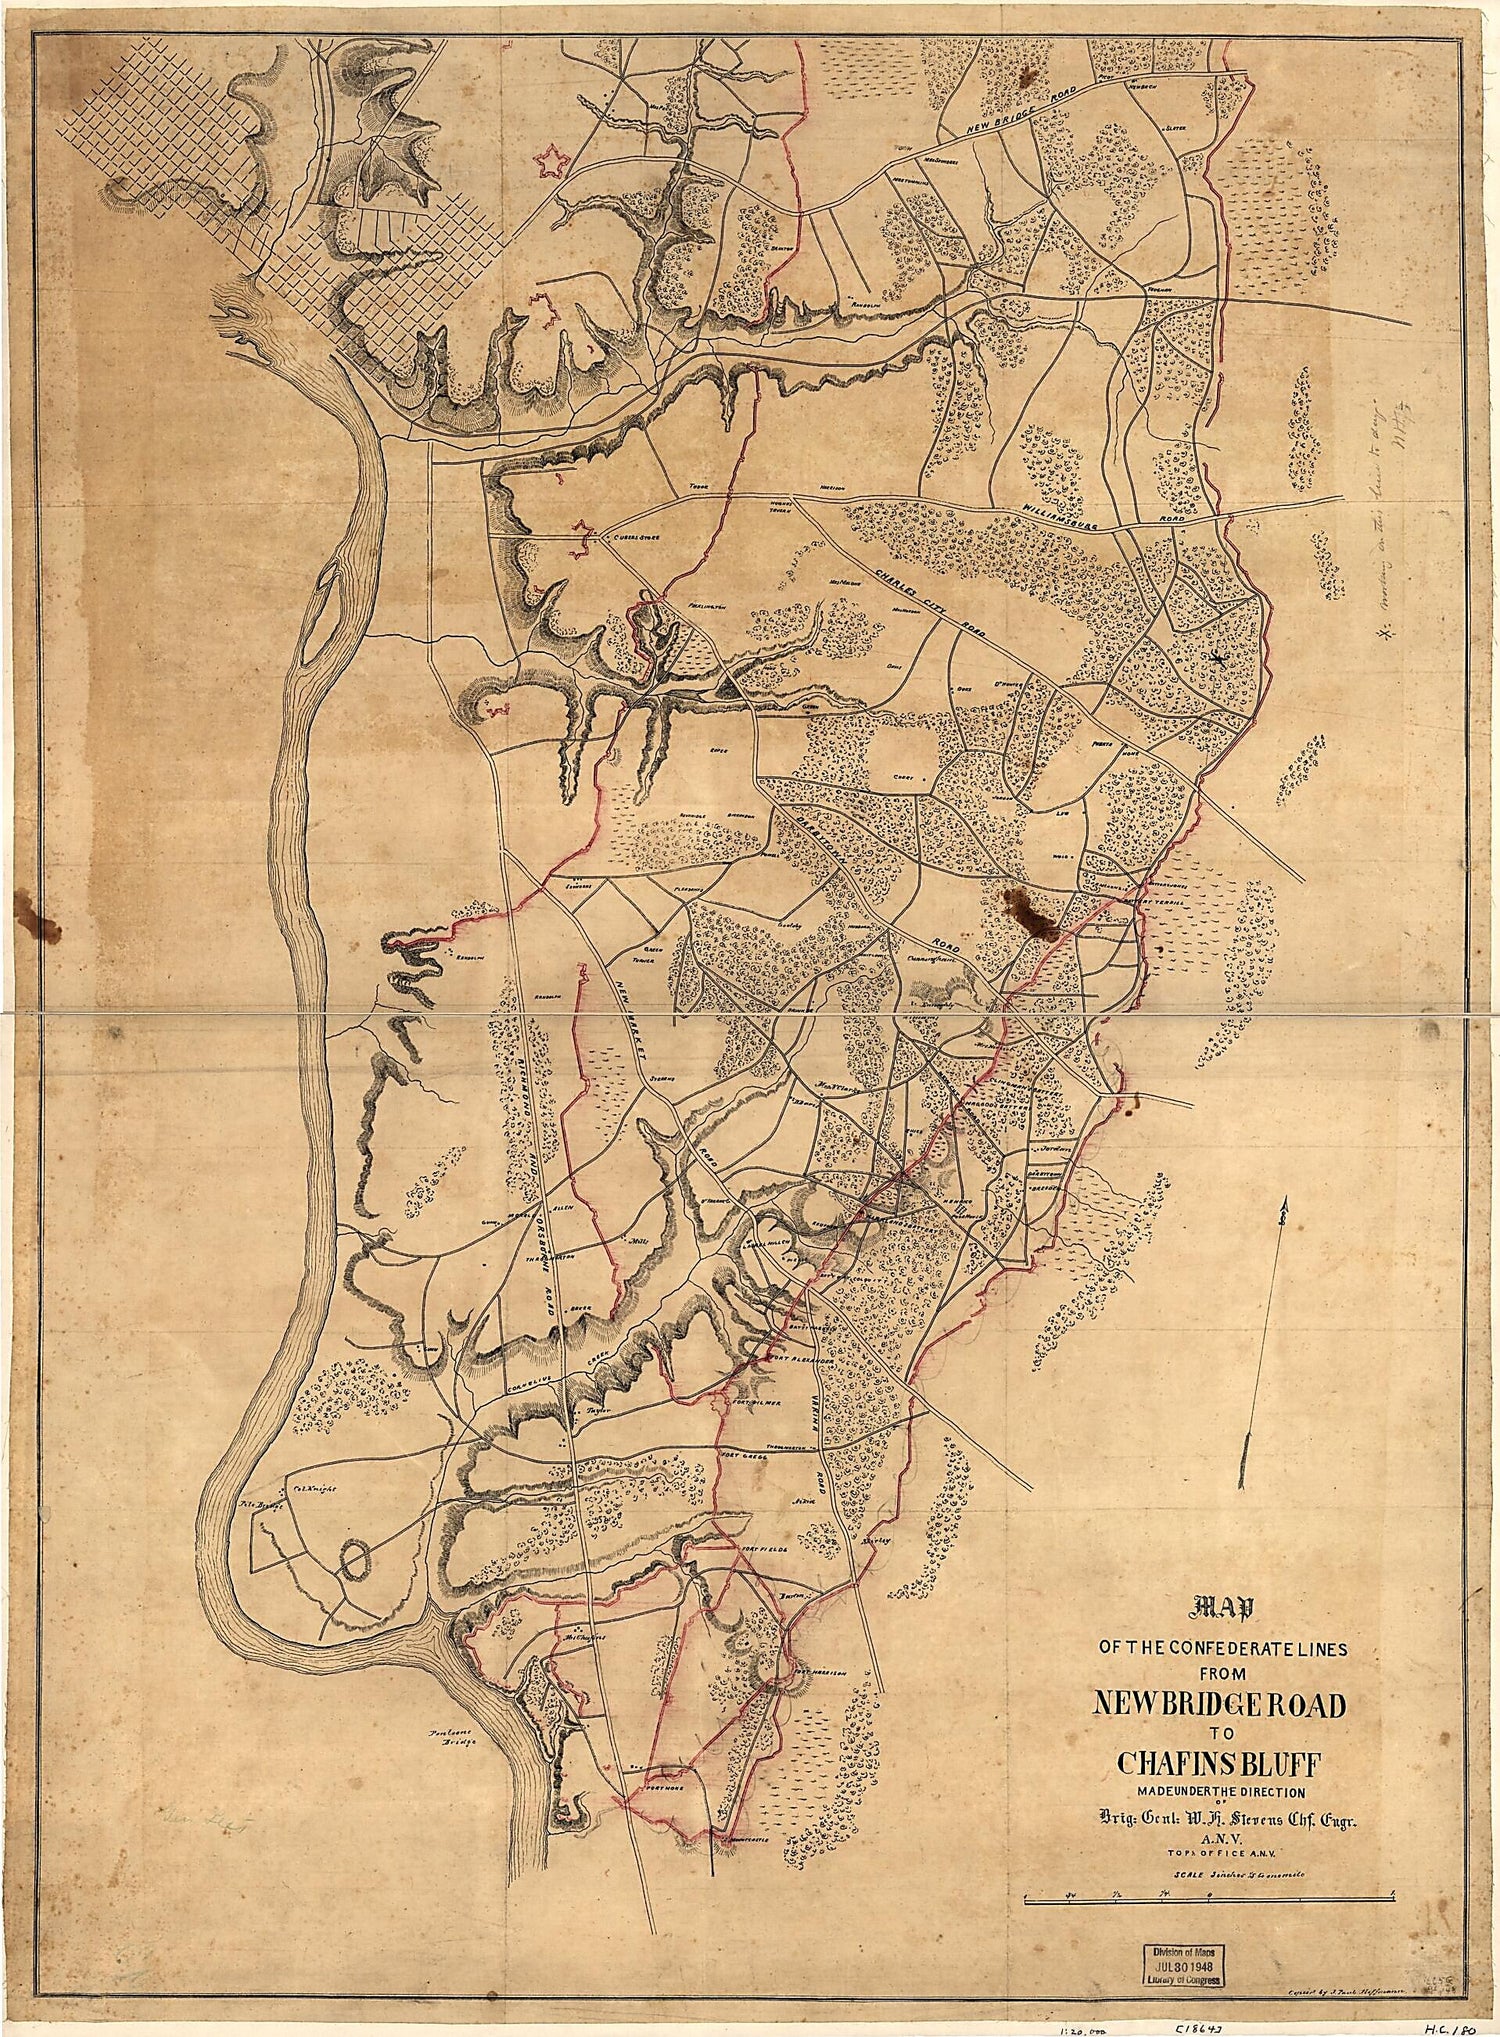 This old map of Map of the Confederate Lines from New Bridge Road to Chafins Bluff from 1864 was created by J. Paul Hoffmann, W. H. (Walter H.) Stevens in 1864